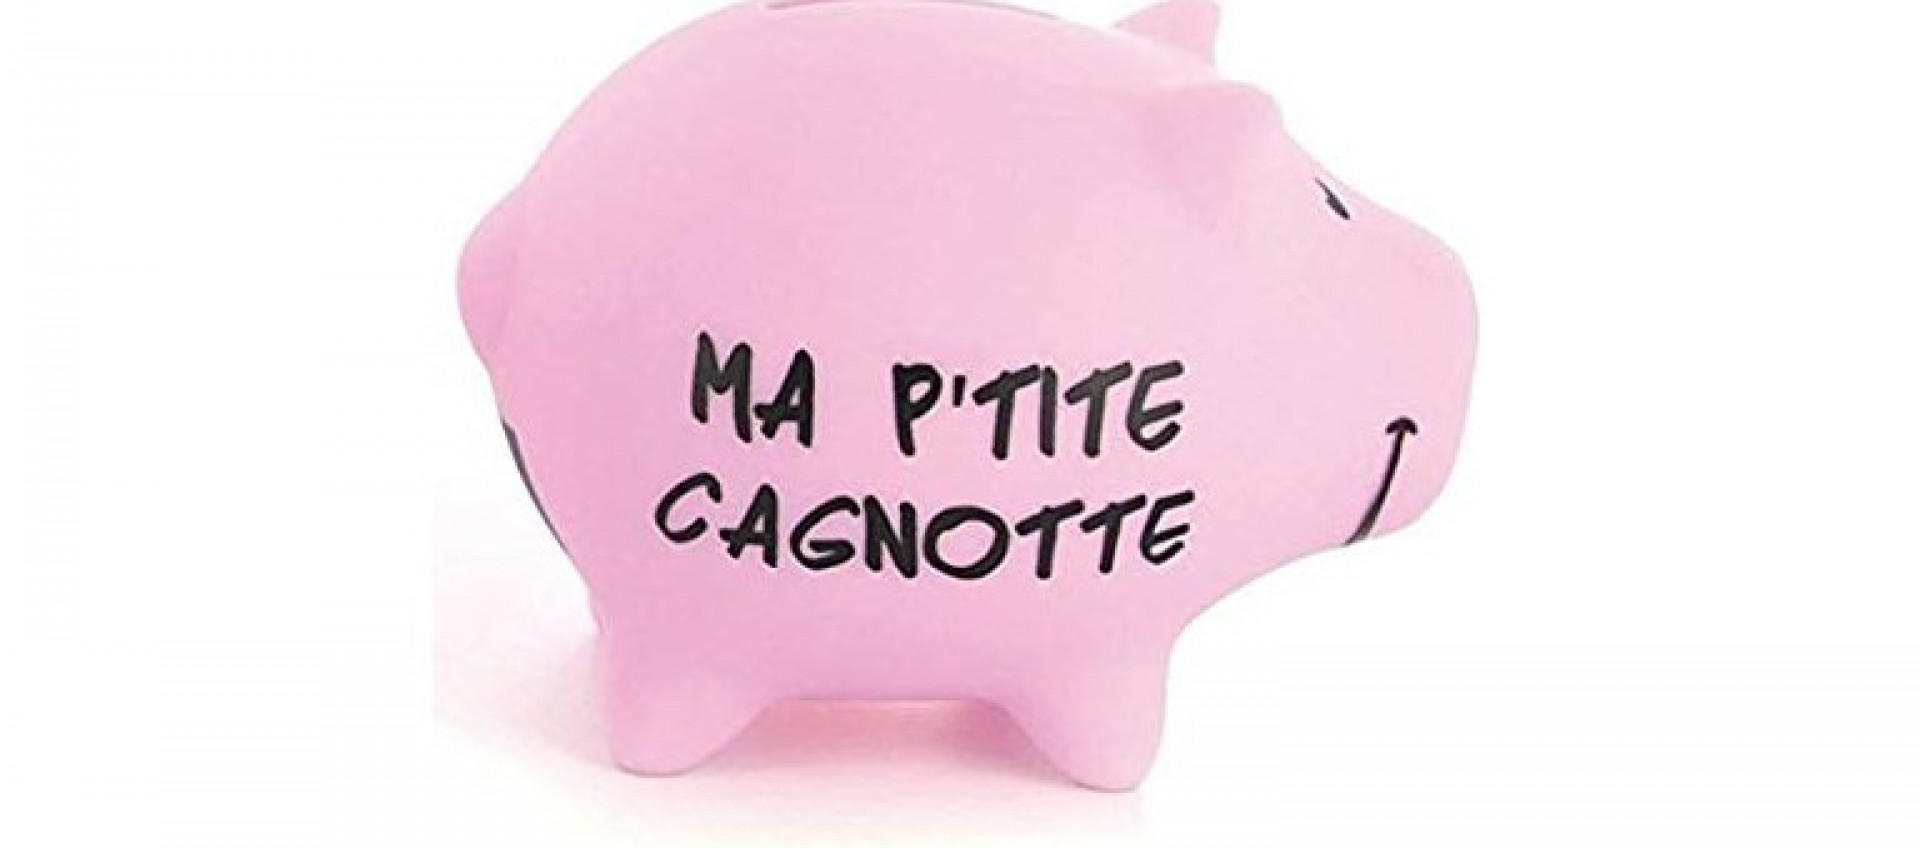 CAGNOTTE